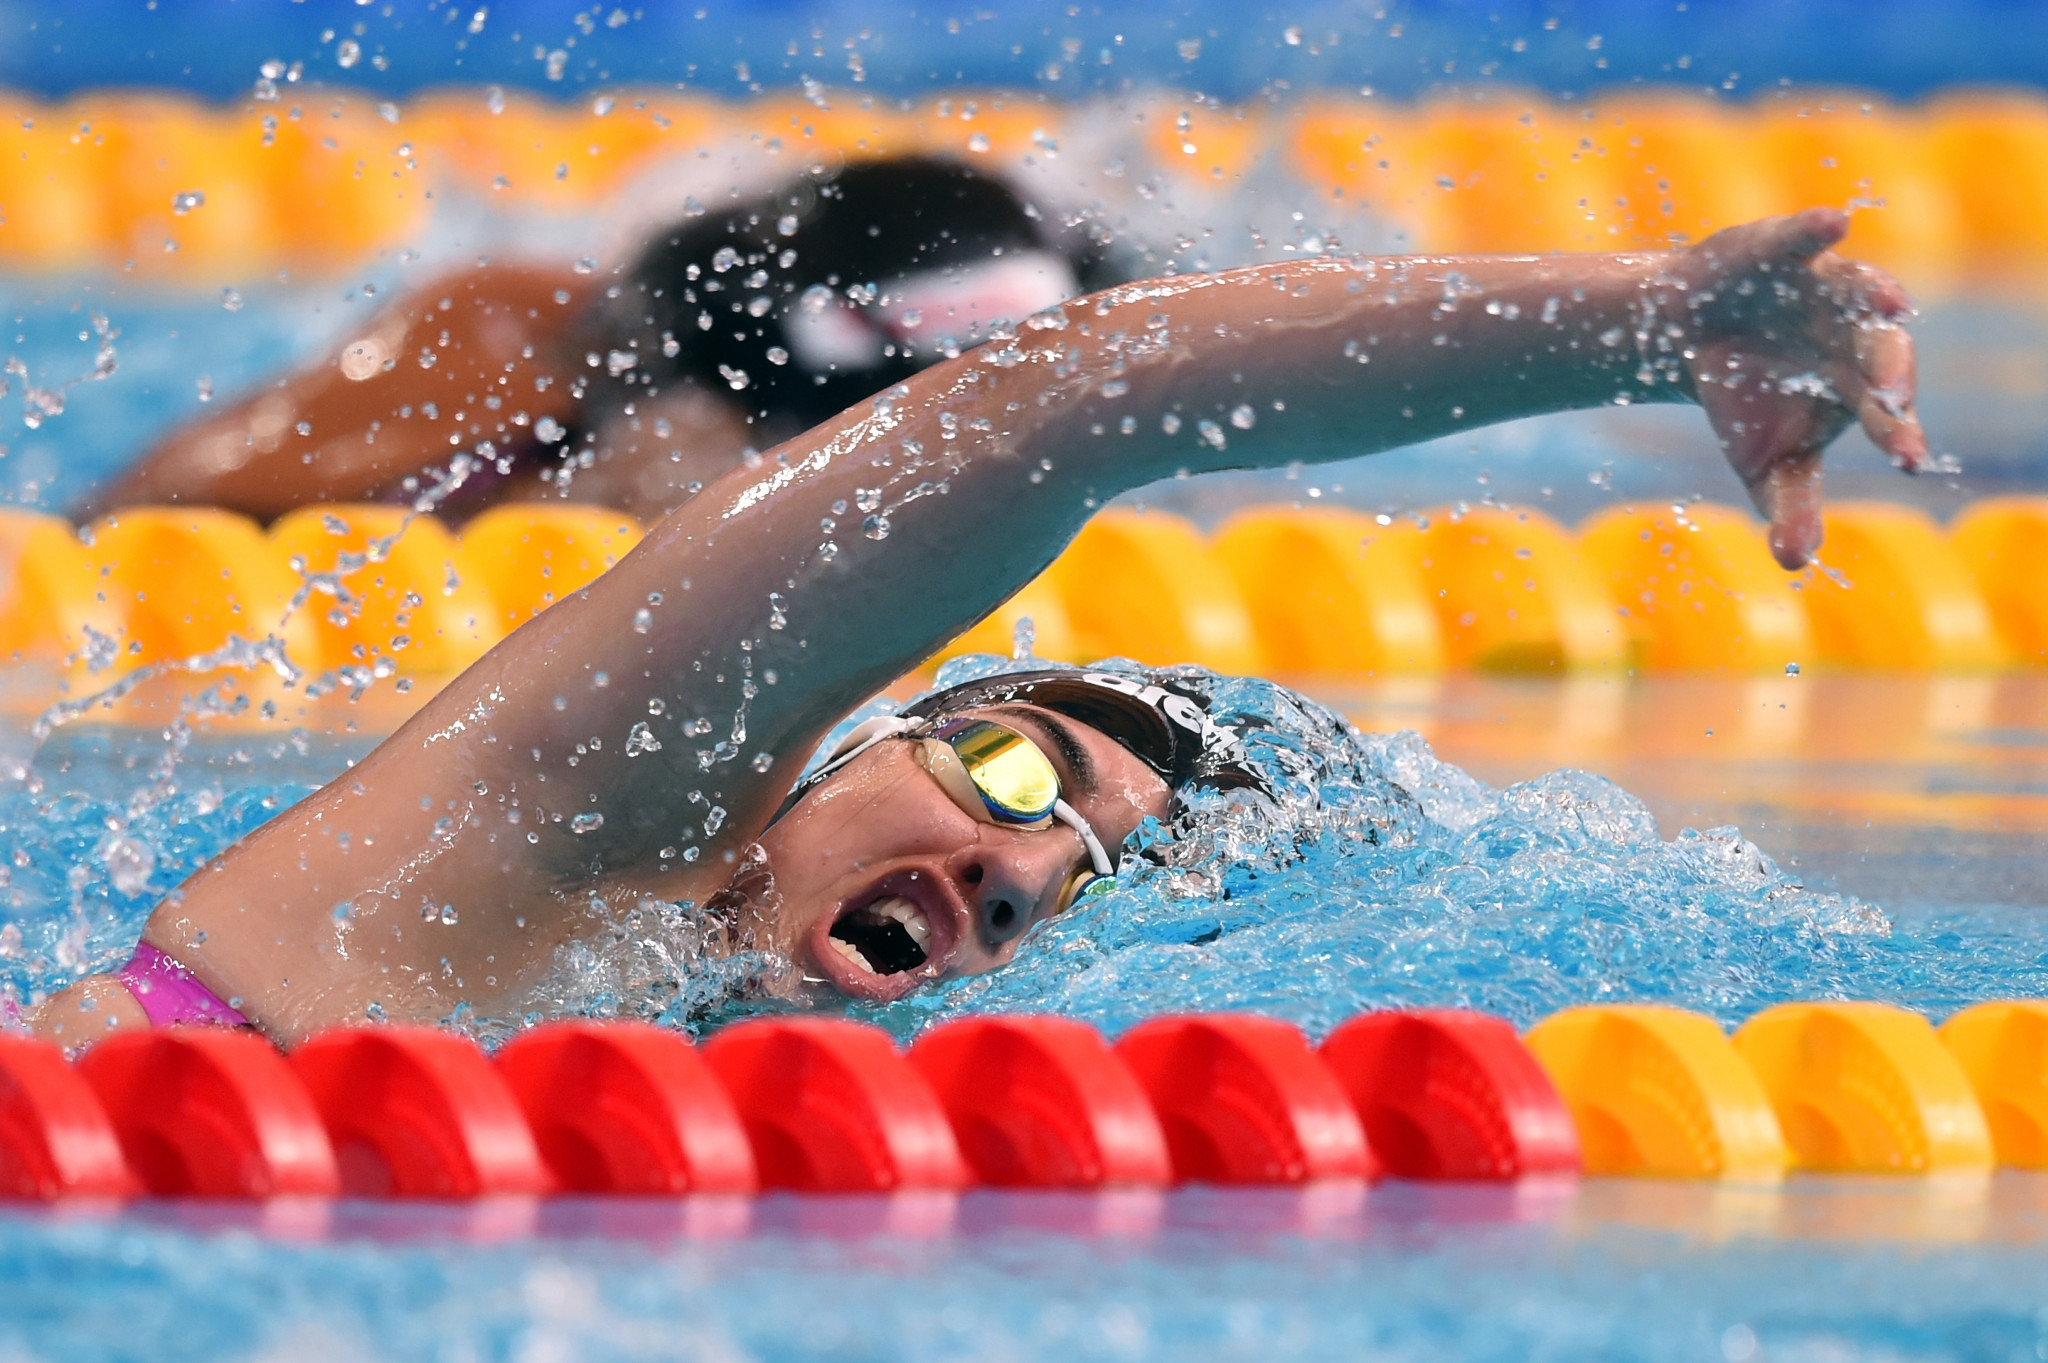 Swimmer Nada Arkaji was among two women who represented Qatar at the Rio 2016 Olympics  ©Getty Images